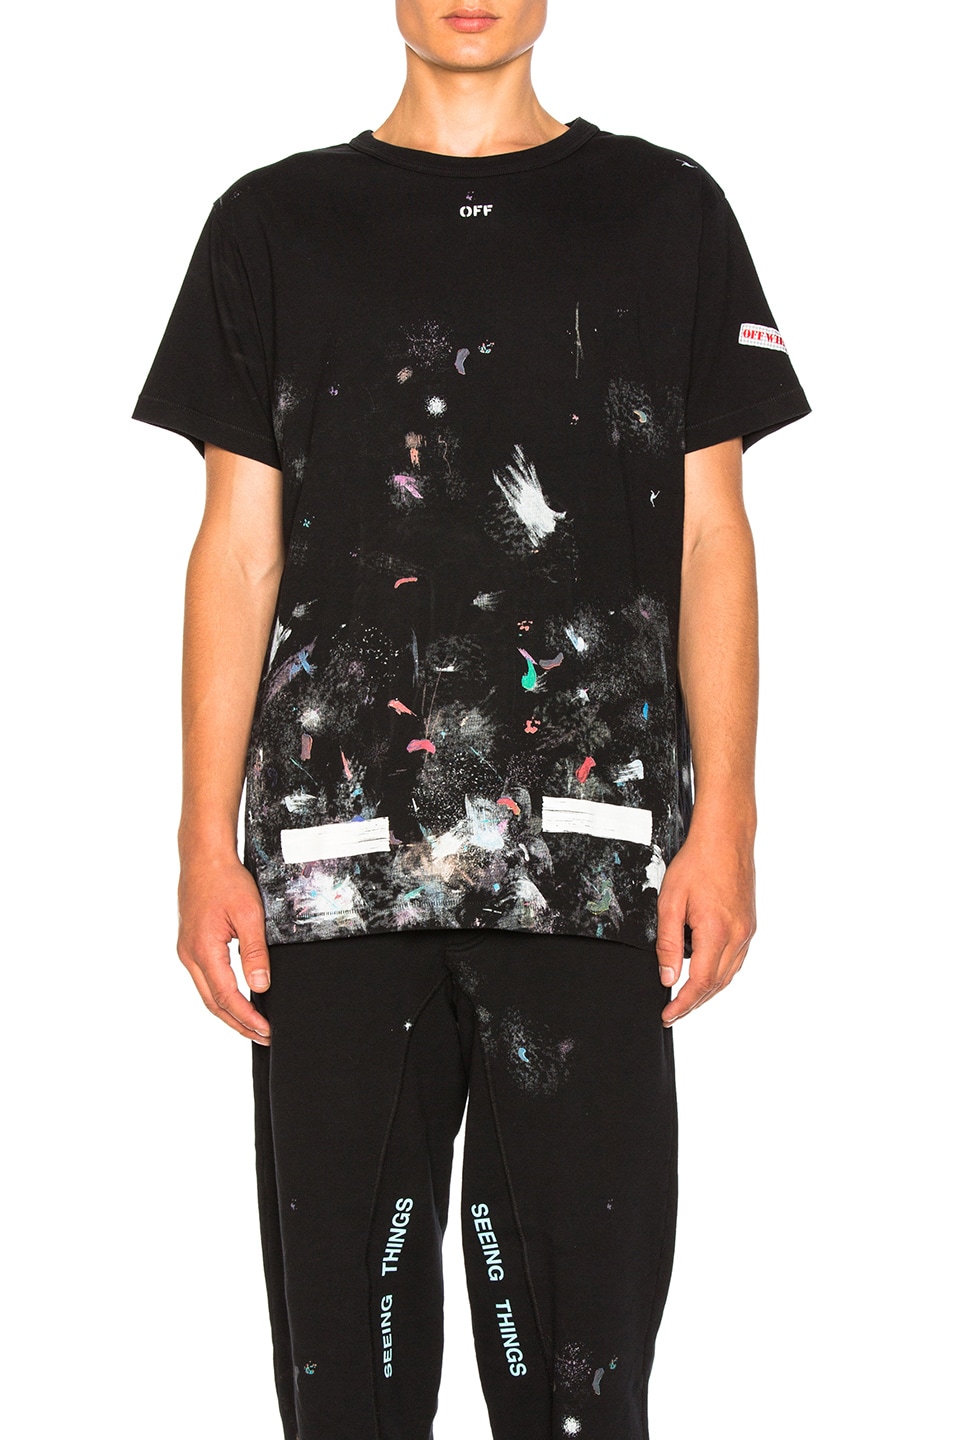 OFF-WHITE Galaxy Brushed Tee in Black & White | ModeSens